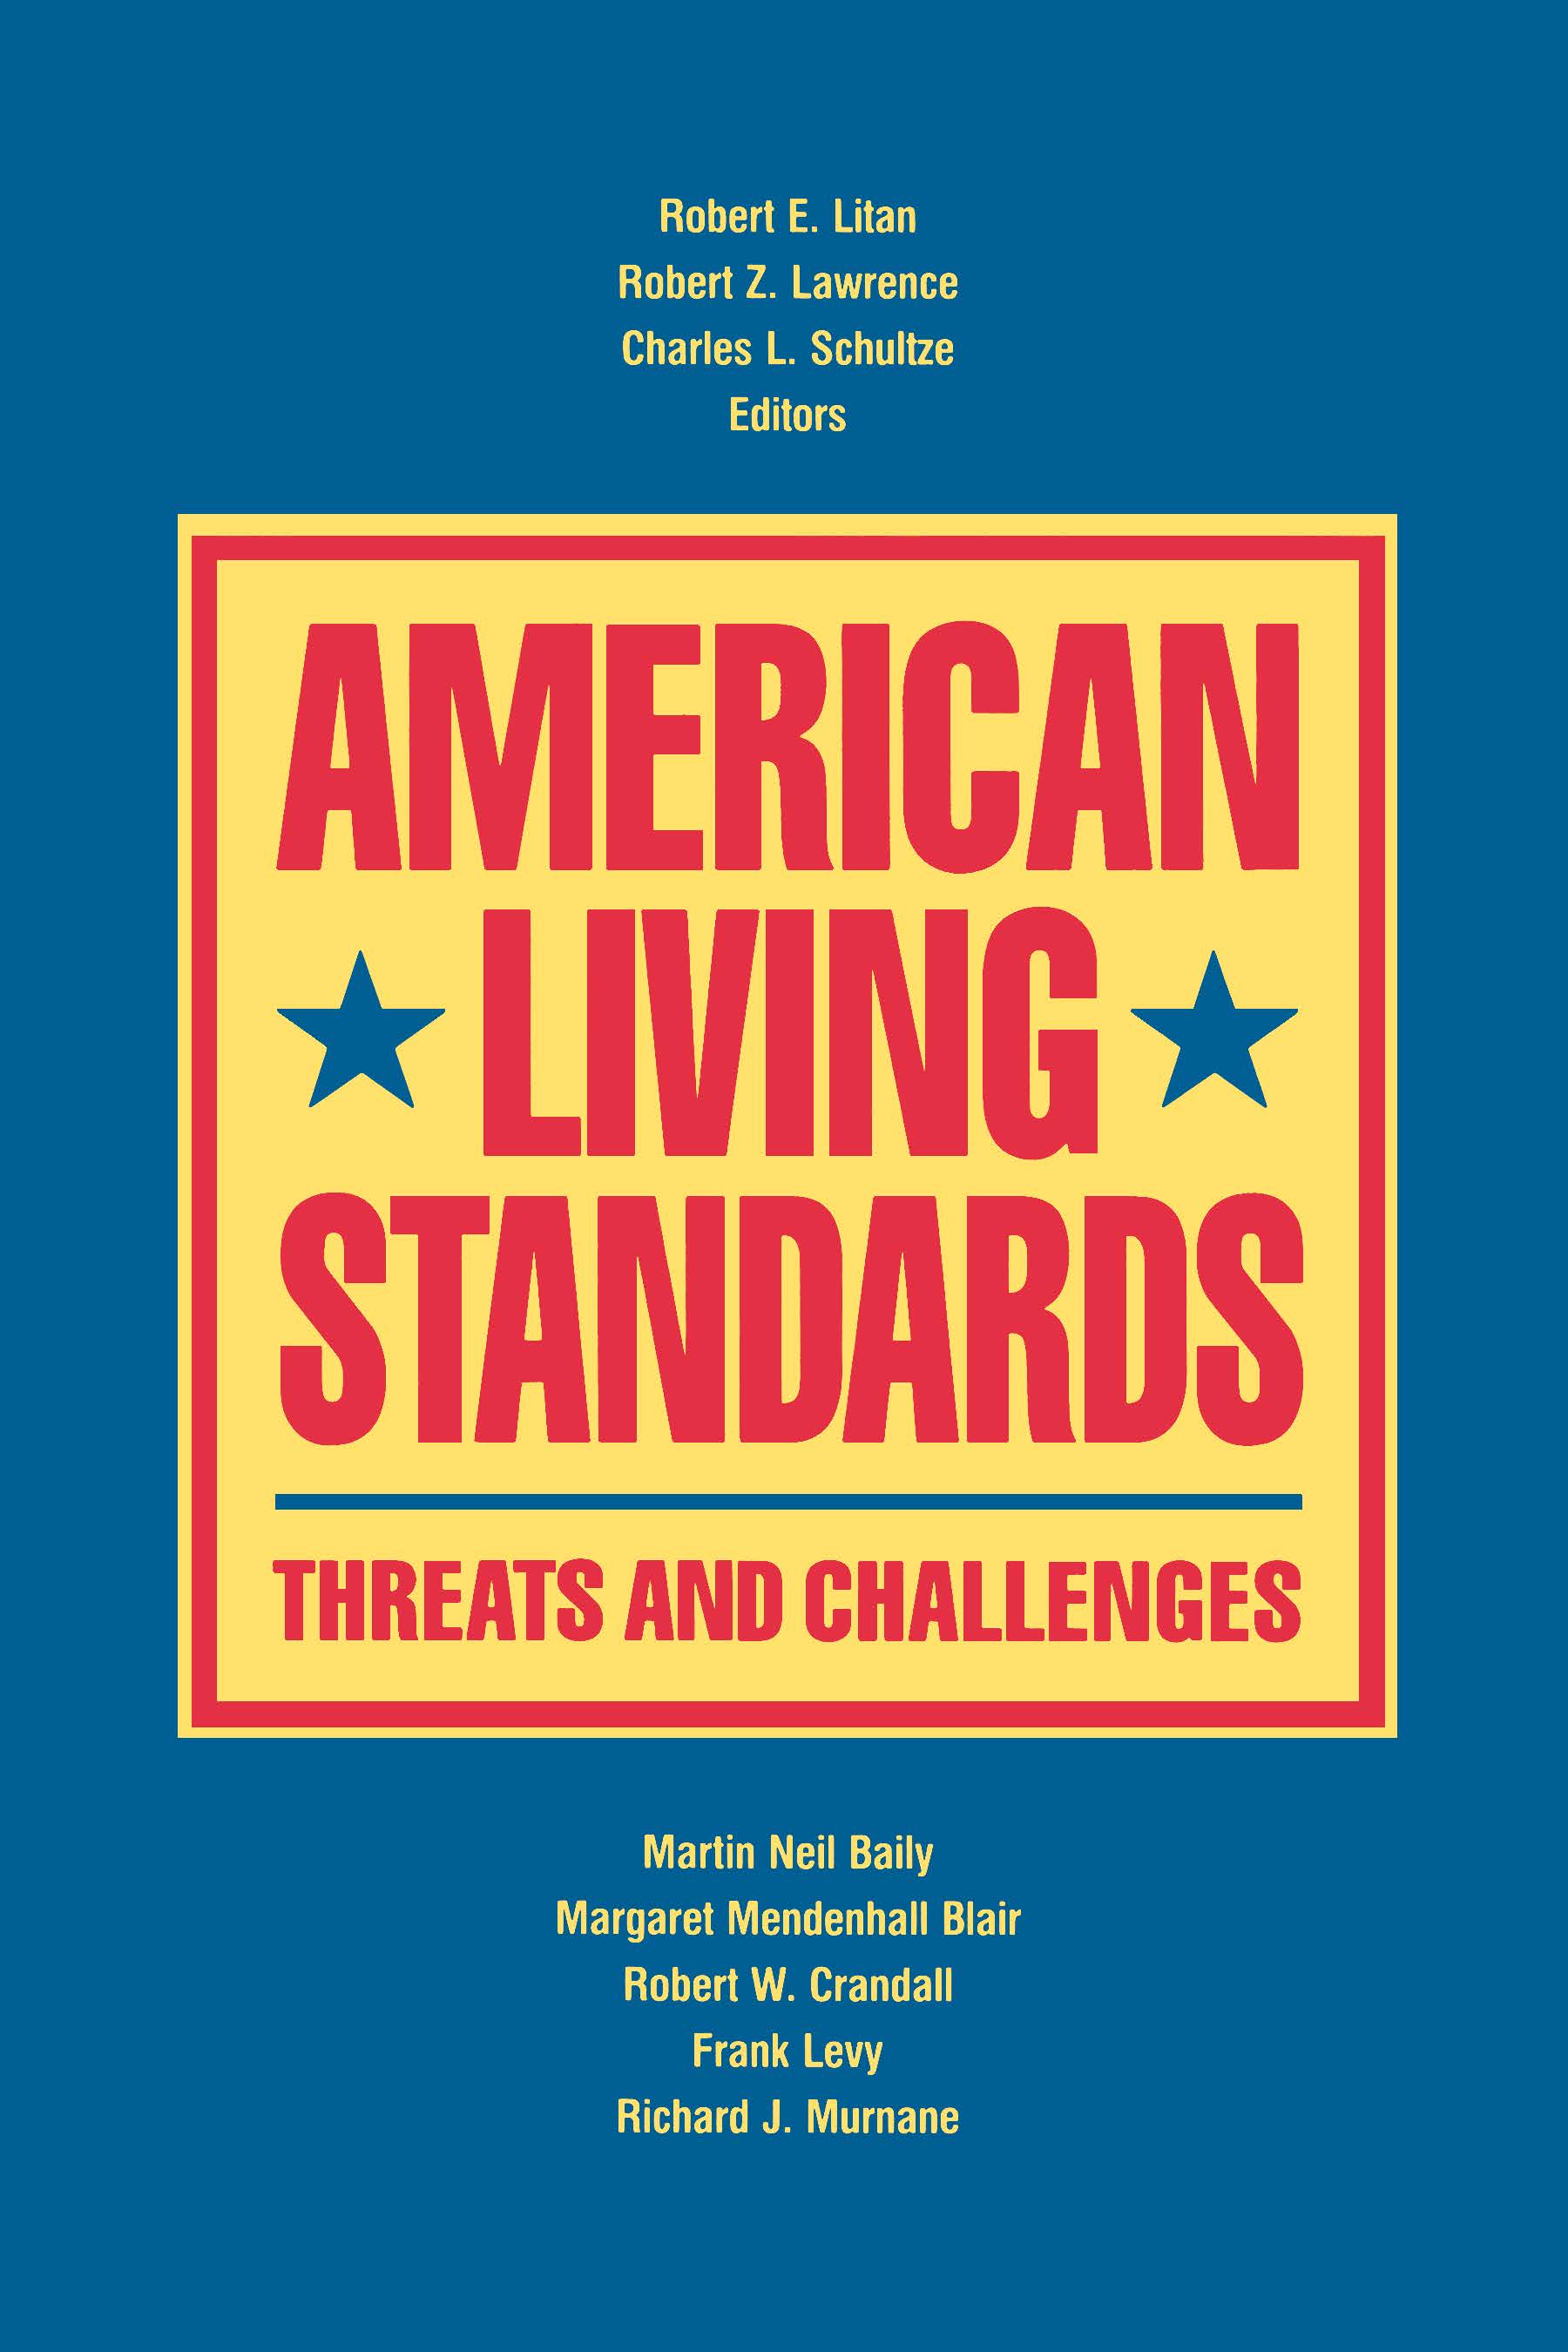 American Living Standards: Threats and Challenges